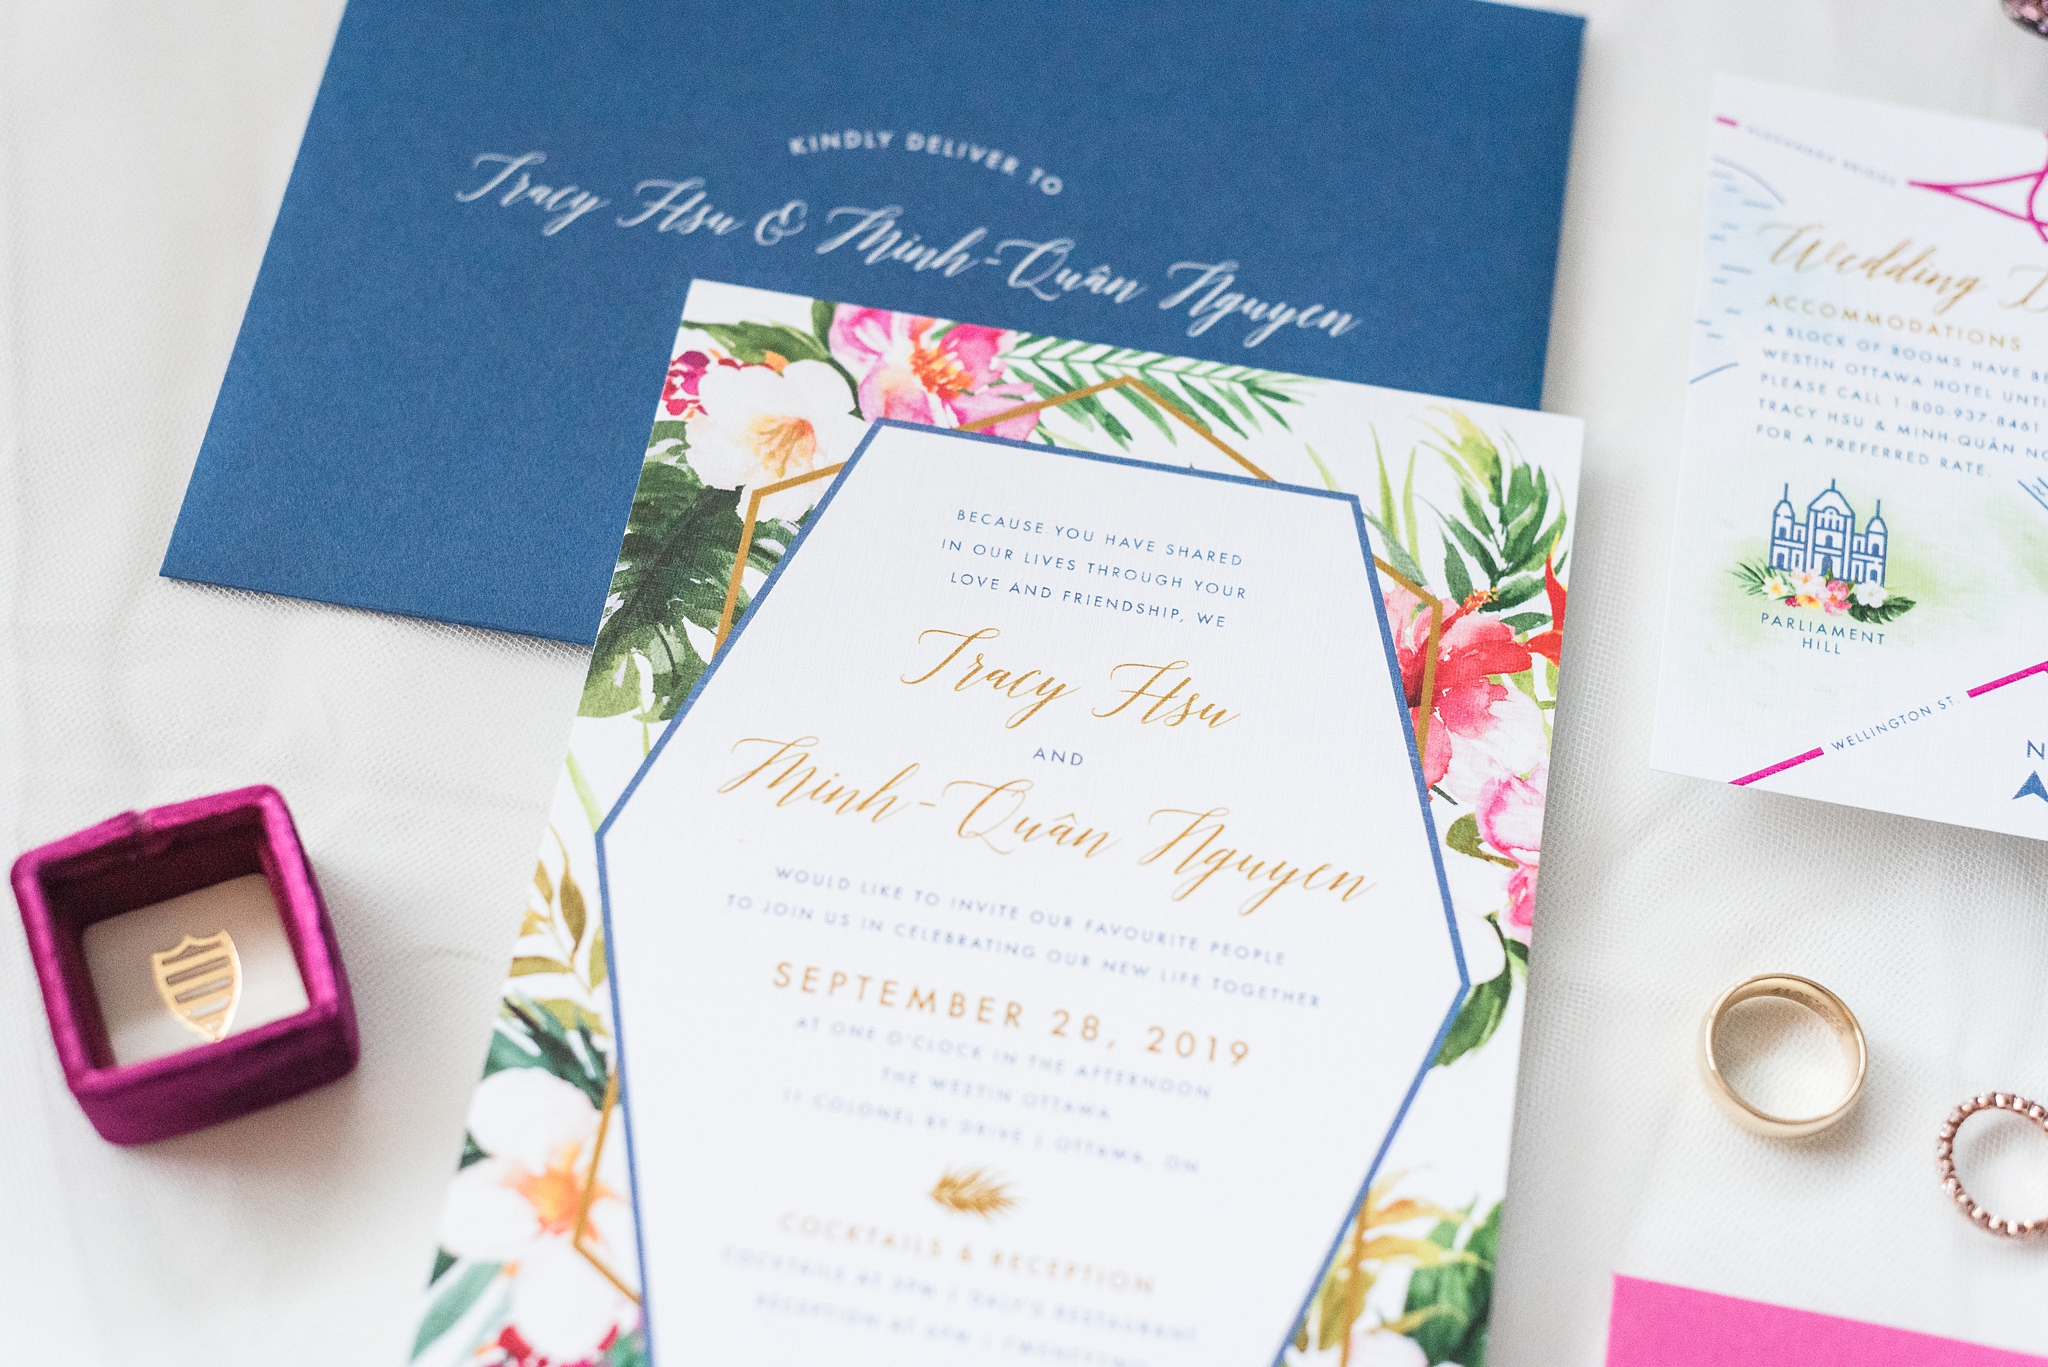 Autumn bold, colourful wedding at twentytwo | ottawa wedding | wedding photos at the westin ottawa downtown get more inspiration from this bright autumn wedding. #ottawawedding #weddingphotography #ottawaweddings